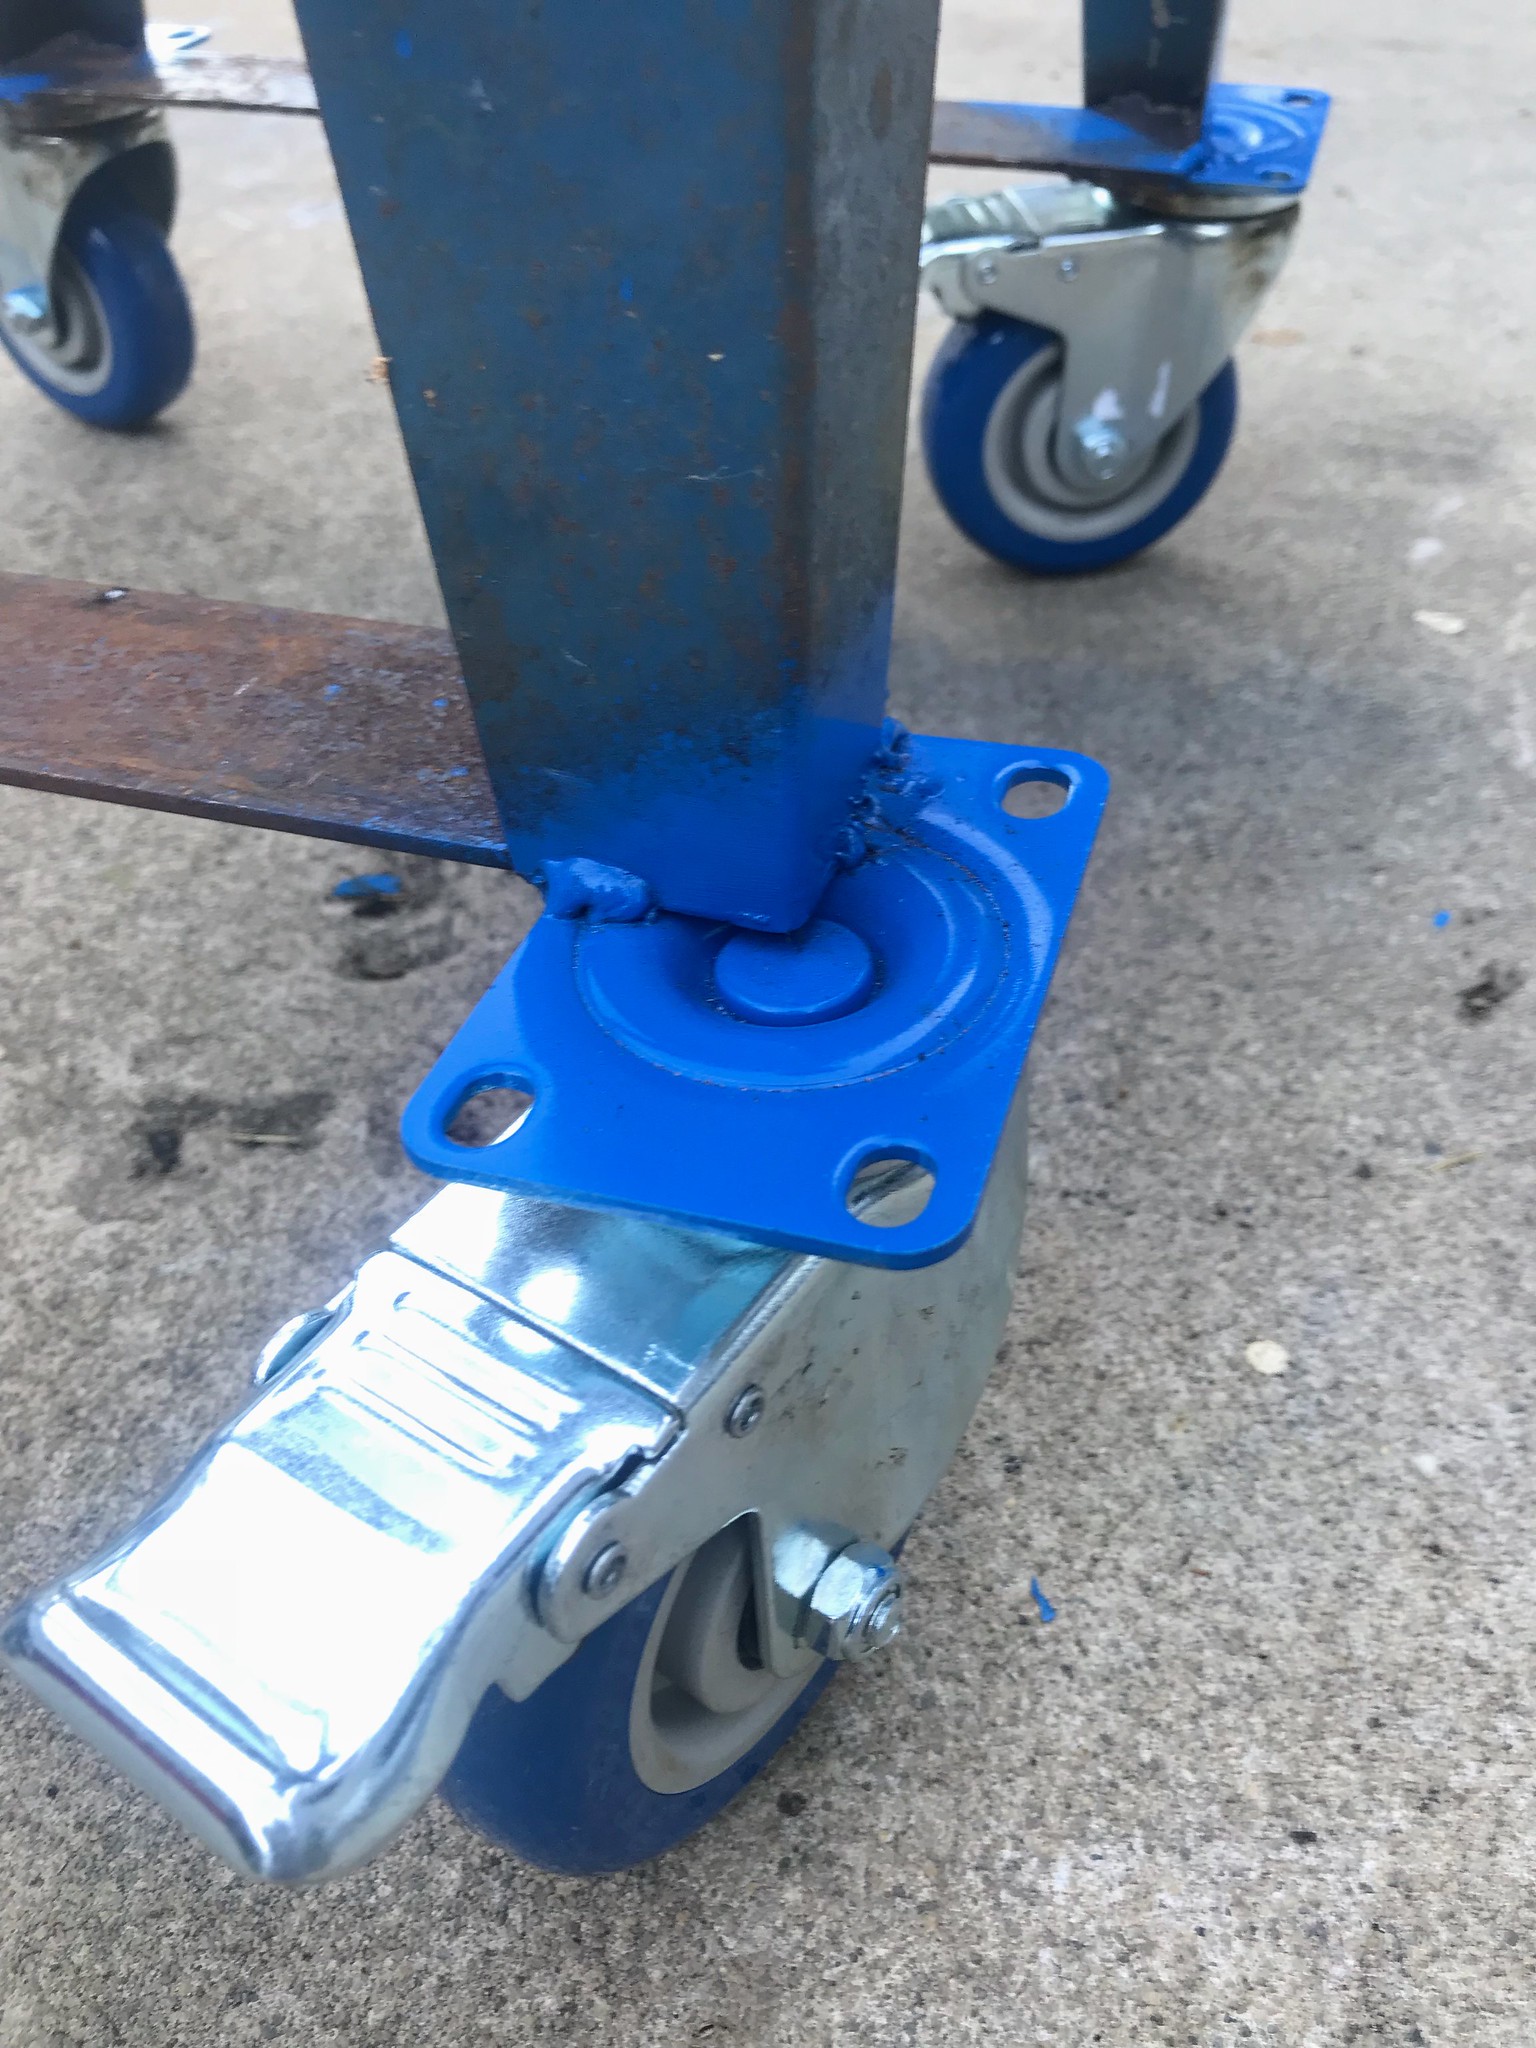 3" casters welded to the crossbar